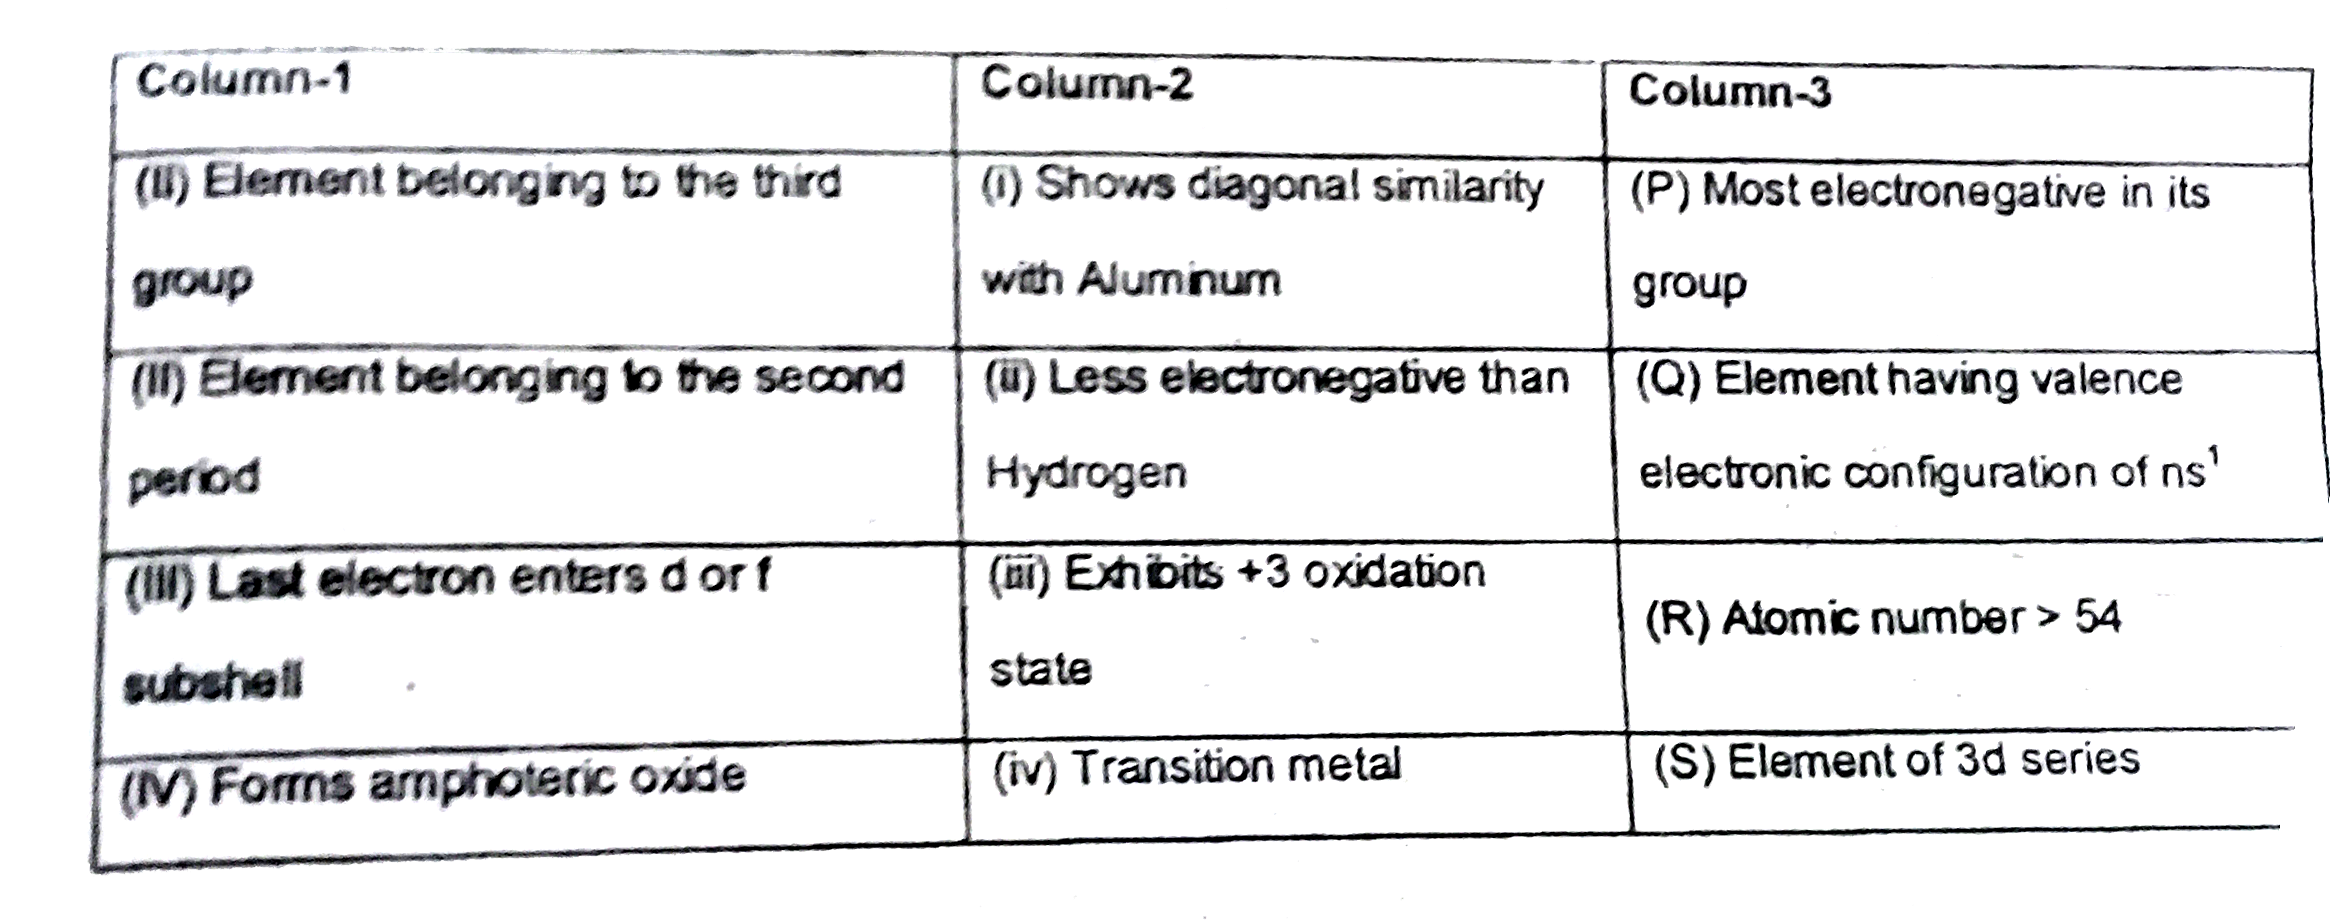 Modern peroidic table helps classify elements according to their similarities.Consider the columns mentioning certain details about elements with comments on their important features.   Answer the question that follow :      Which of the following combinations is correct for Chromium but not for Zinc ?